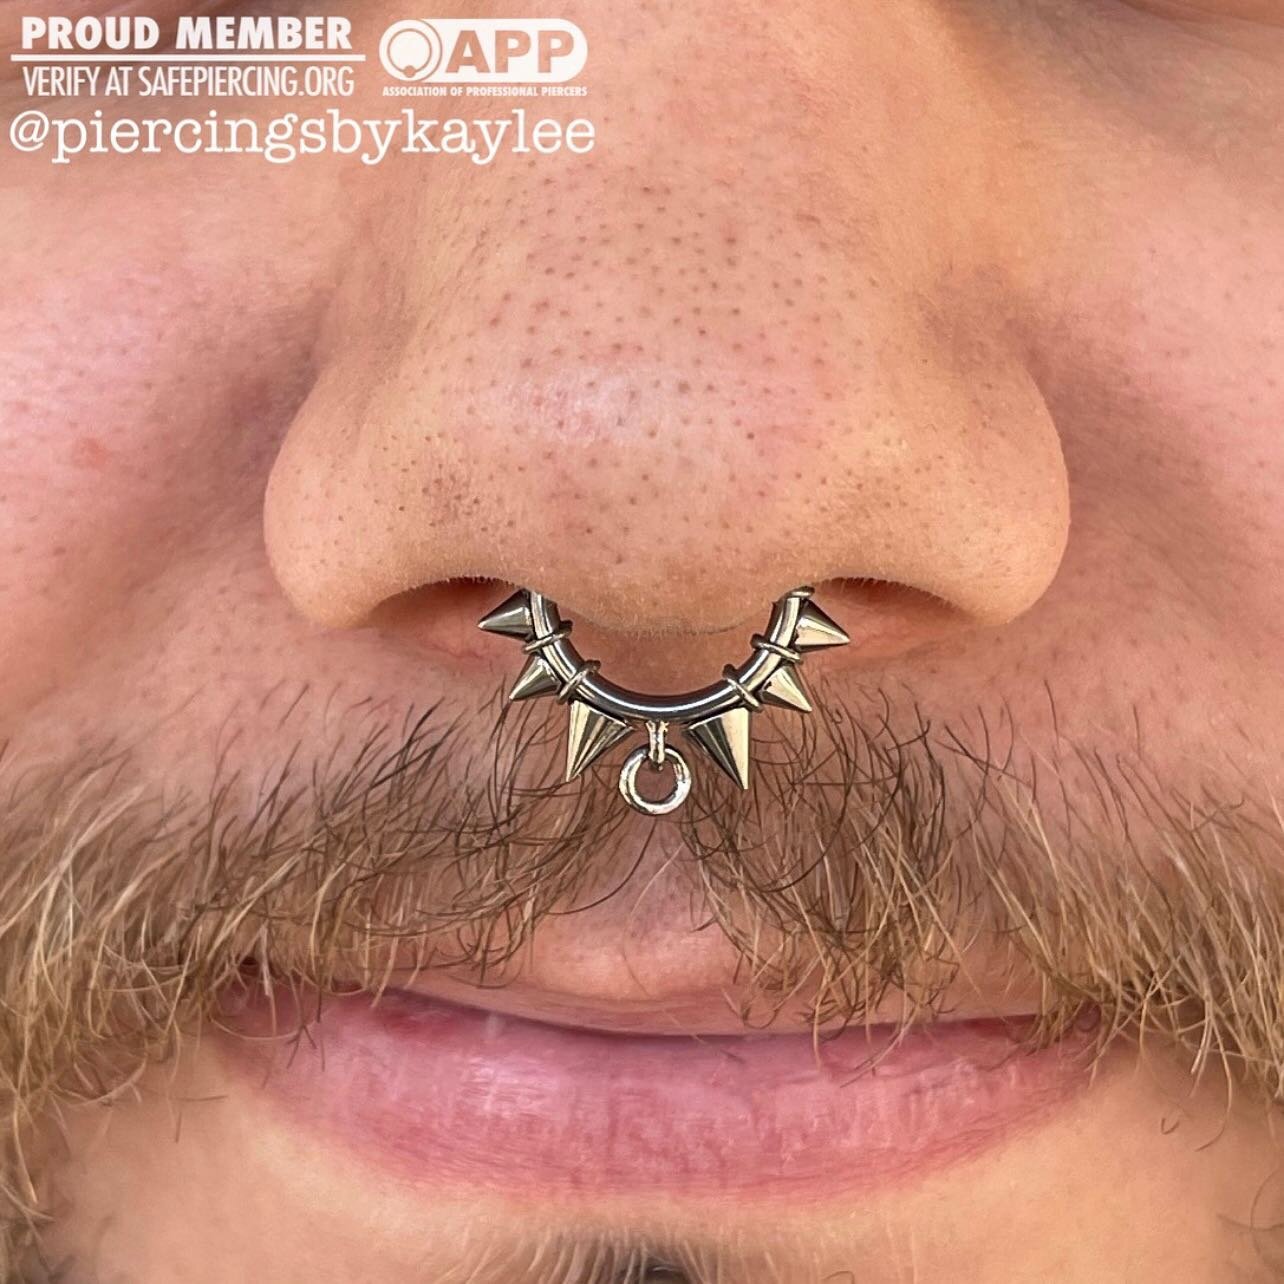 Healed septum that I pierced a while back that I just got to upgrade to this super rad O-ring collar spiked hinged ring from @zadamer_jewelry ✨ second picture, also features their bridge piercing that I had the pleasure of doing a while back it&rsquo